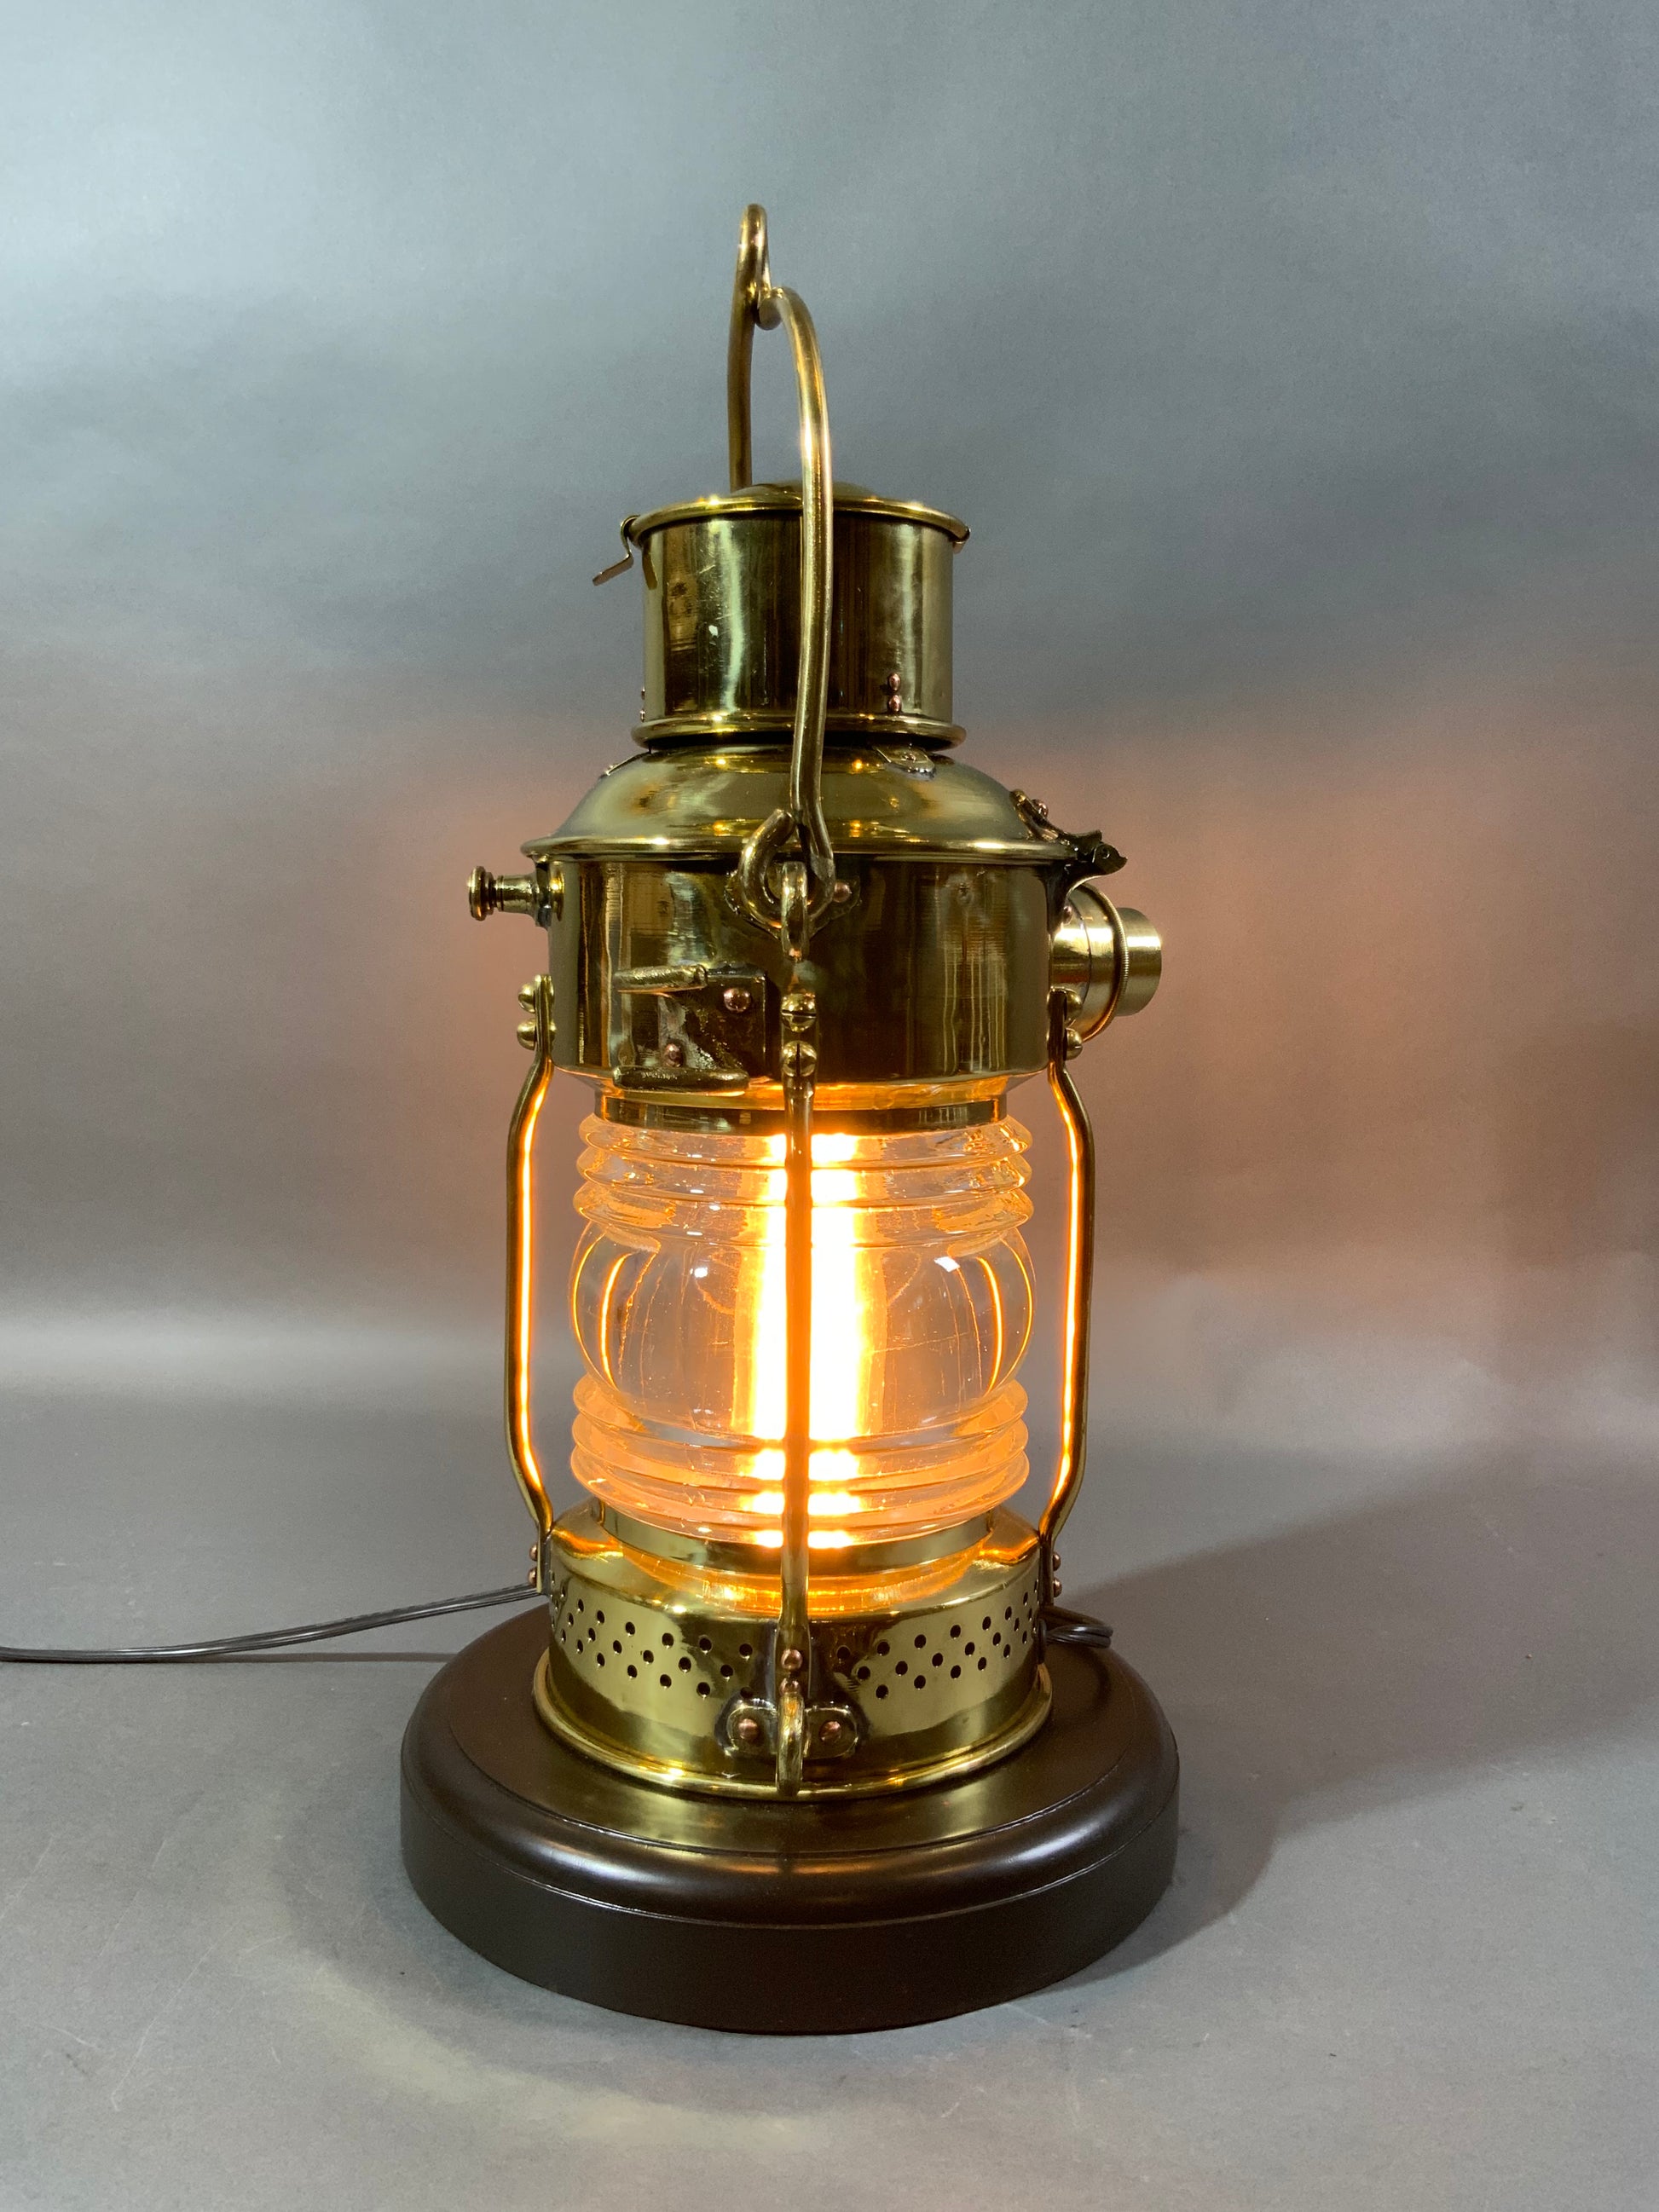 Antique Ships Anchor Lantern by French Maker - Lannan Gallery